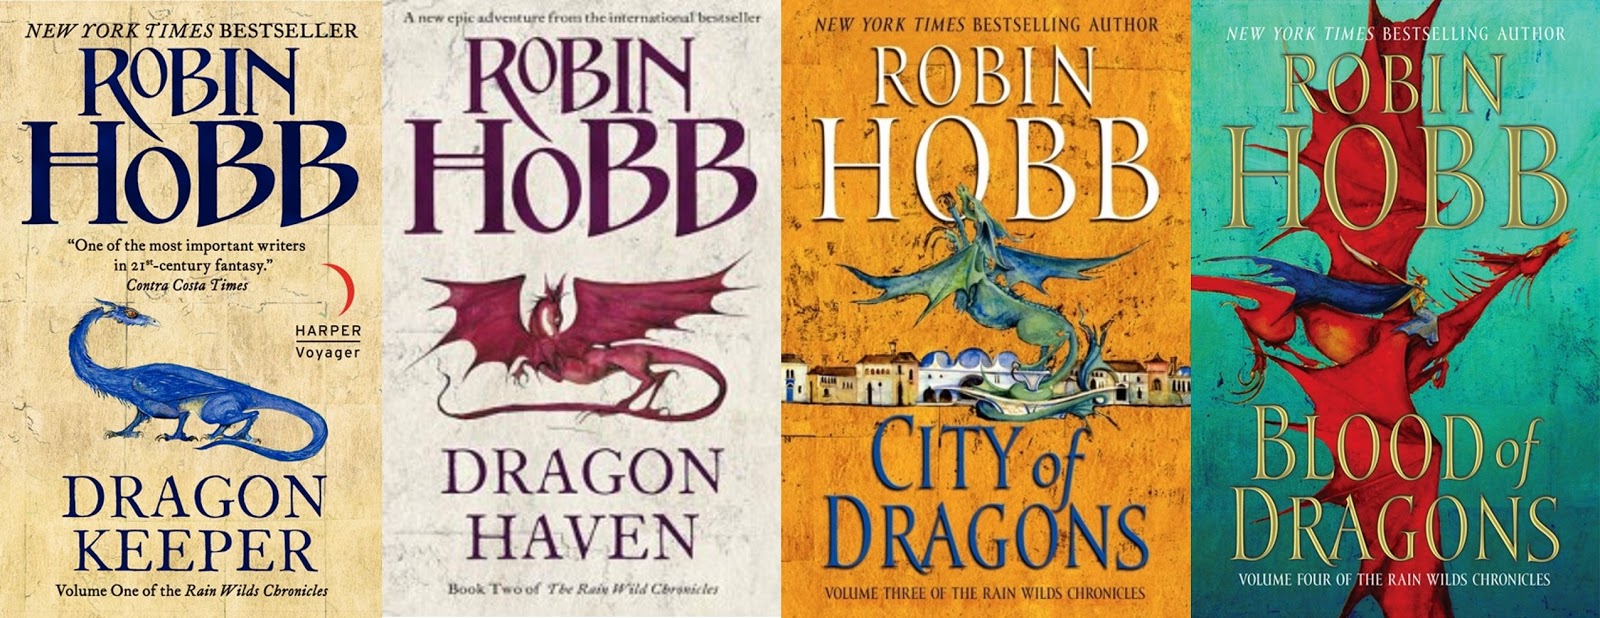 All 4 book covers of Rain Wilds Chronicles by Robin Hobb